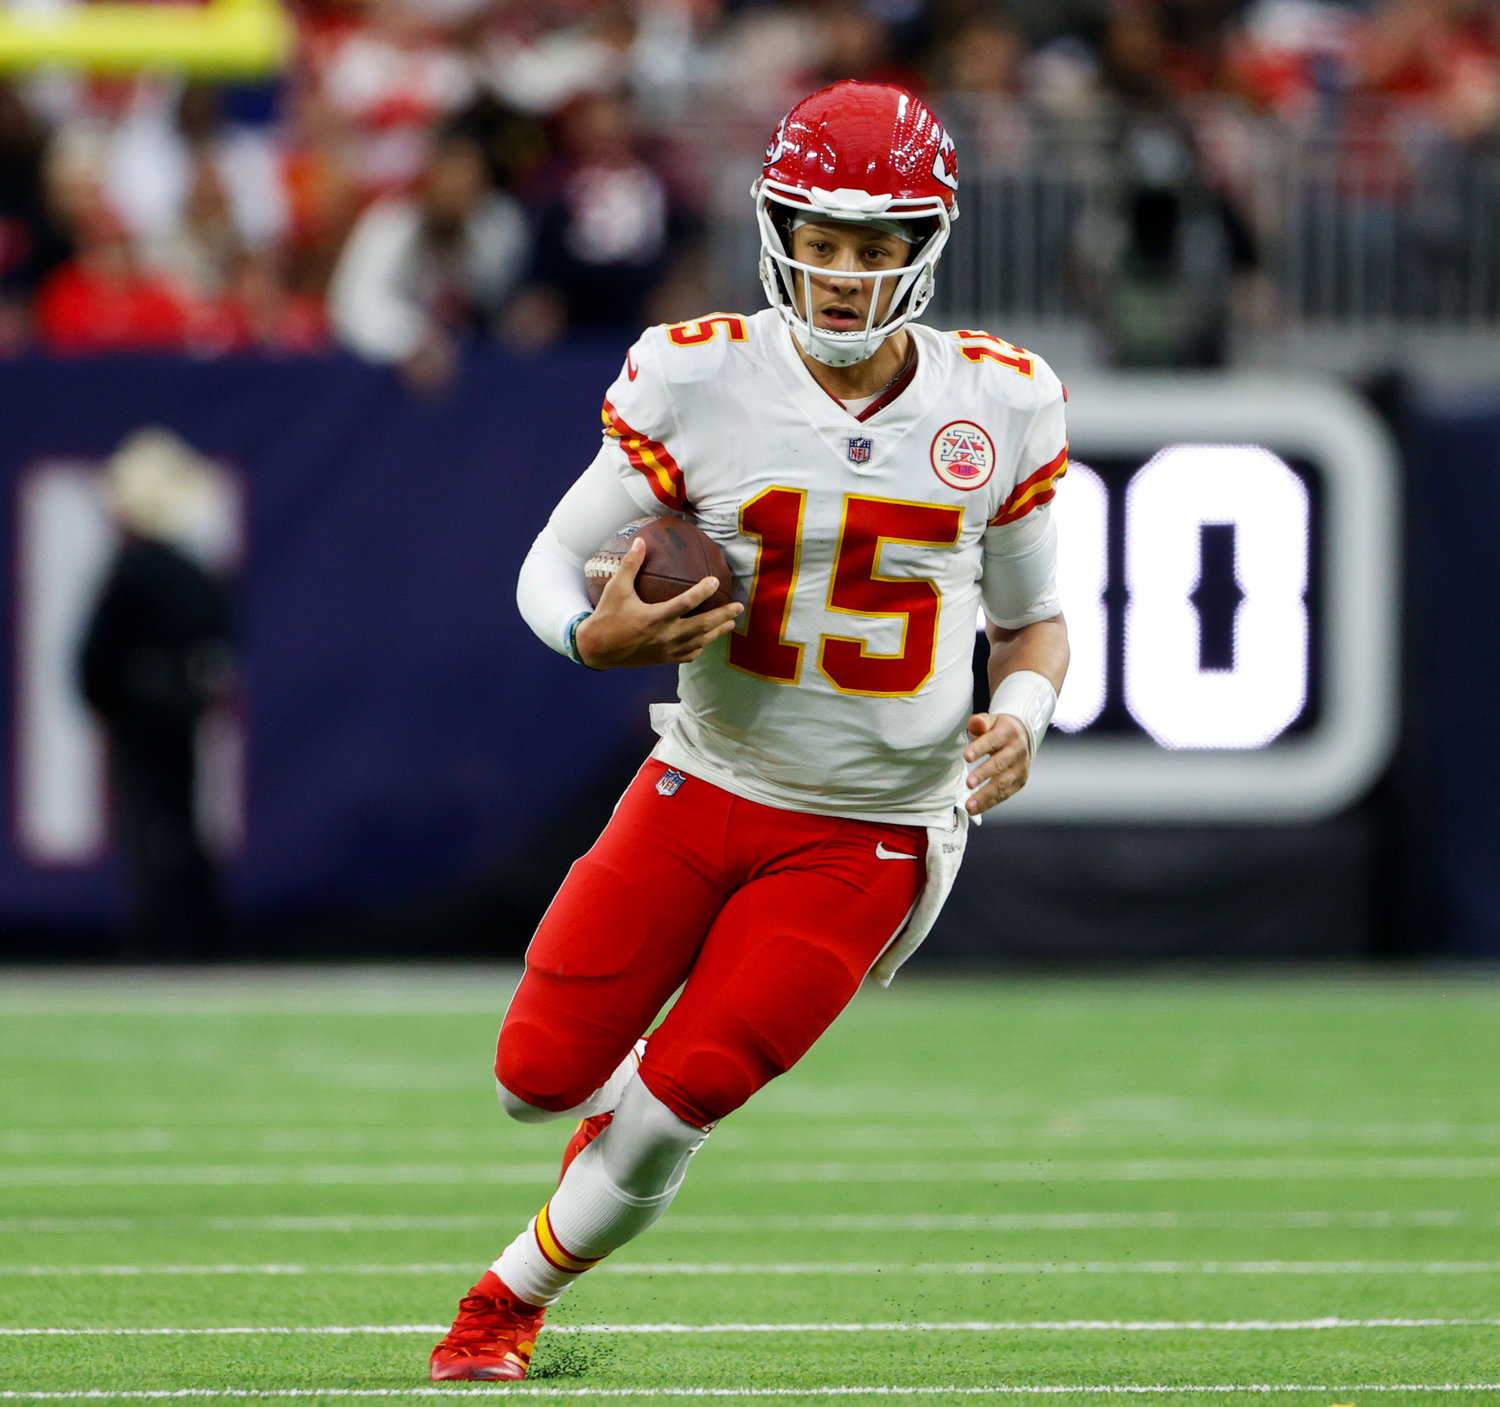 Kansas City Chiefs quarterback Patrick Mahomes (15) carries the ball to set up a potential game-winning field goal near the end of regulation in an NFL game between the Texans and the Chiefs on Dec. 18, 2022, in Houston. The kick failed but the Chiefs won, 30-24, in overtime.